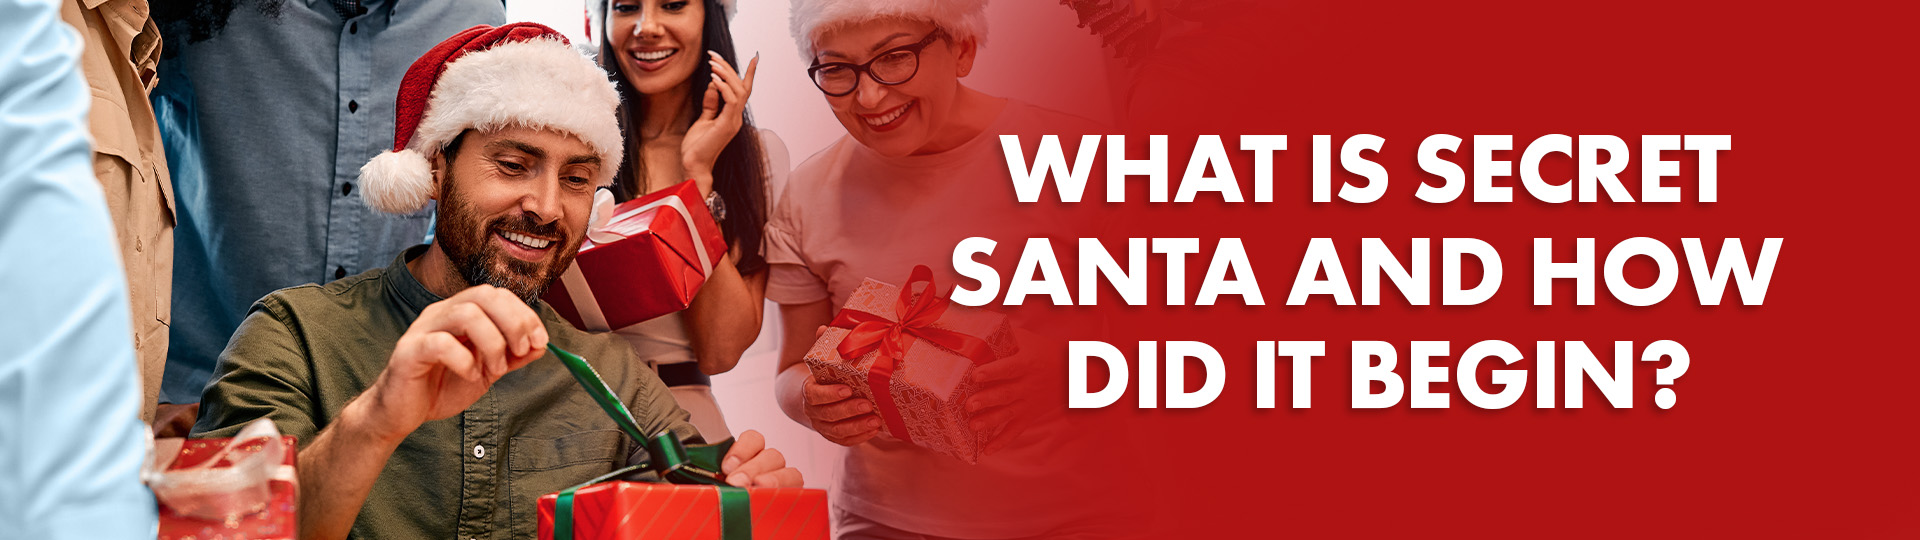 Secret Santa: A Mystery Christmas Party Game - Figure Out Who's Naughty and  Who's Nice - Christmas Game for Adults